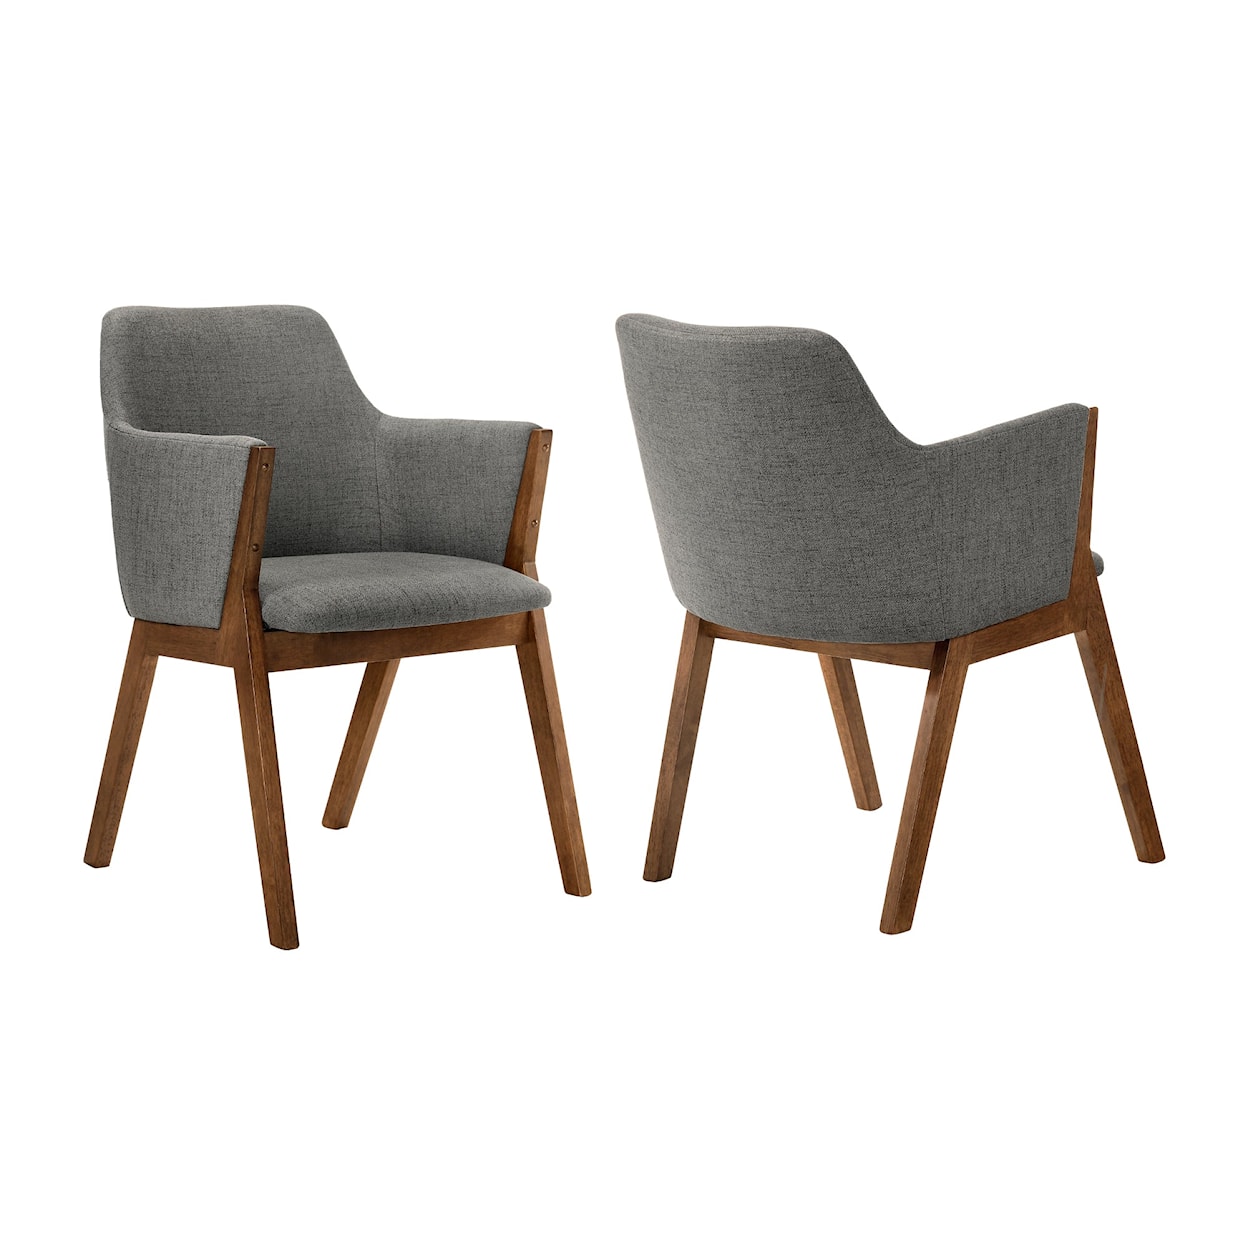 Armen Living Renzo Set of 2 Side Chairs